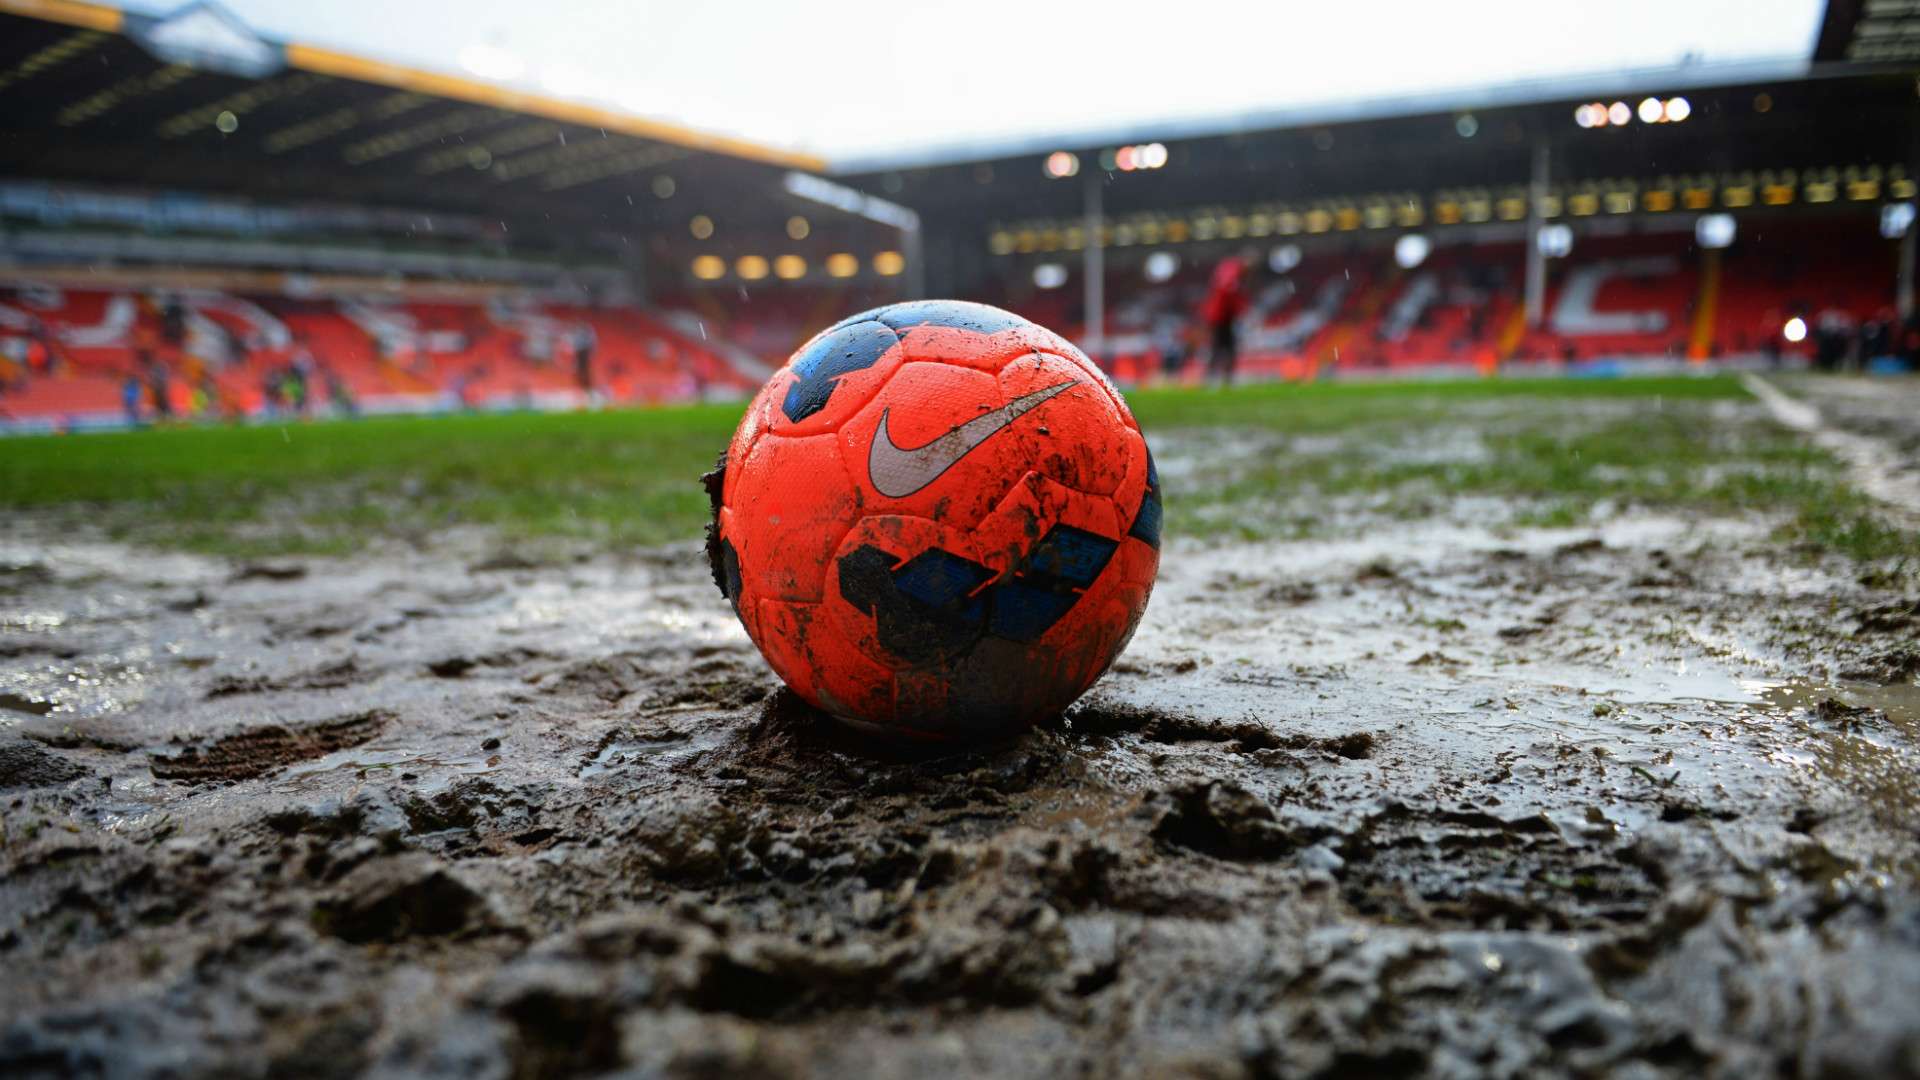 Ball in the mud